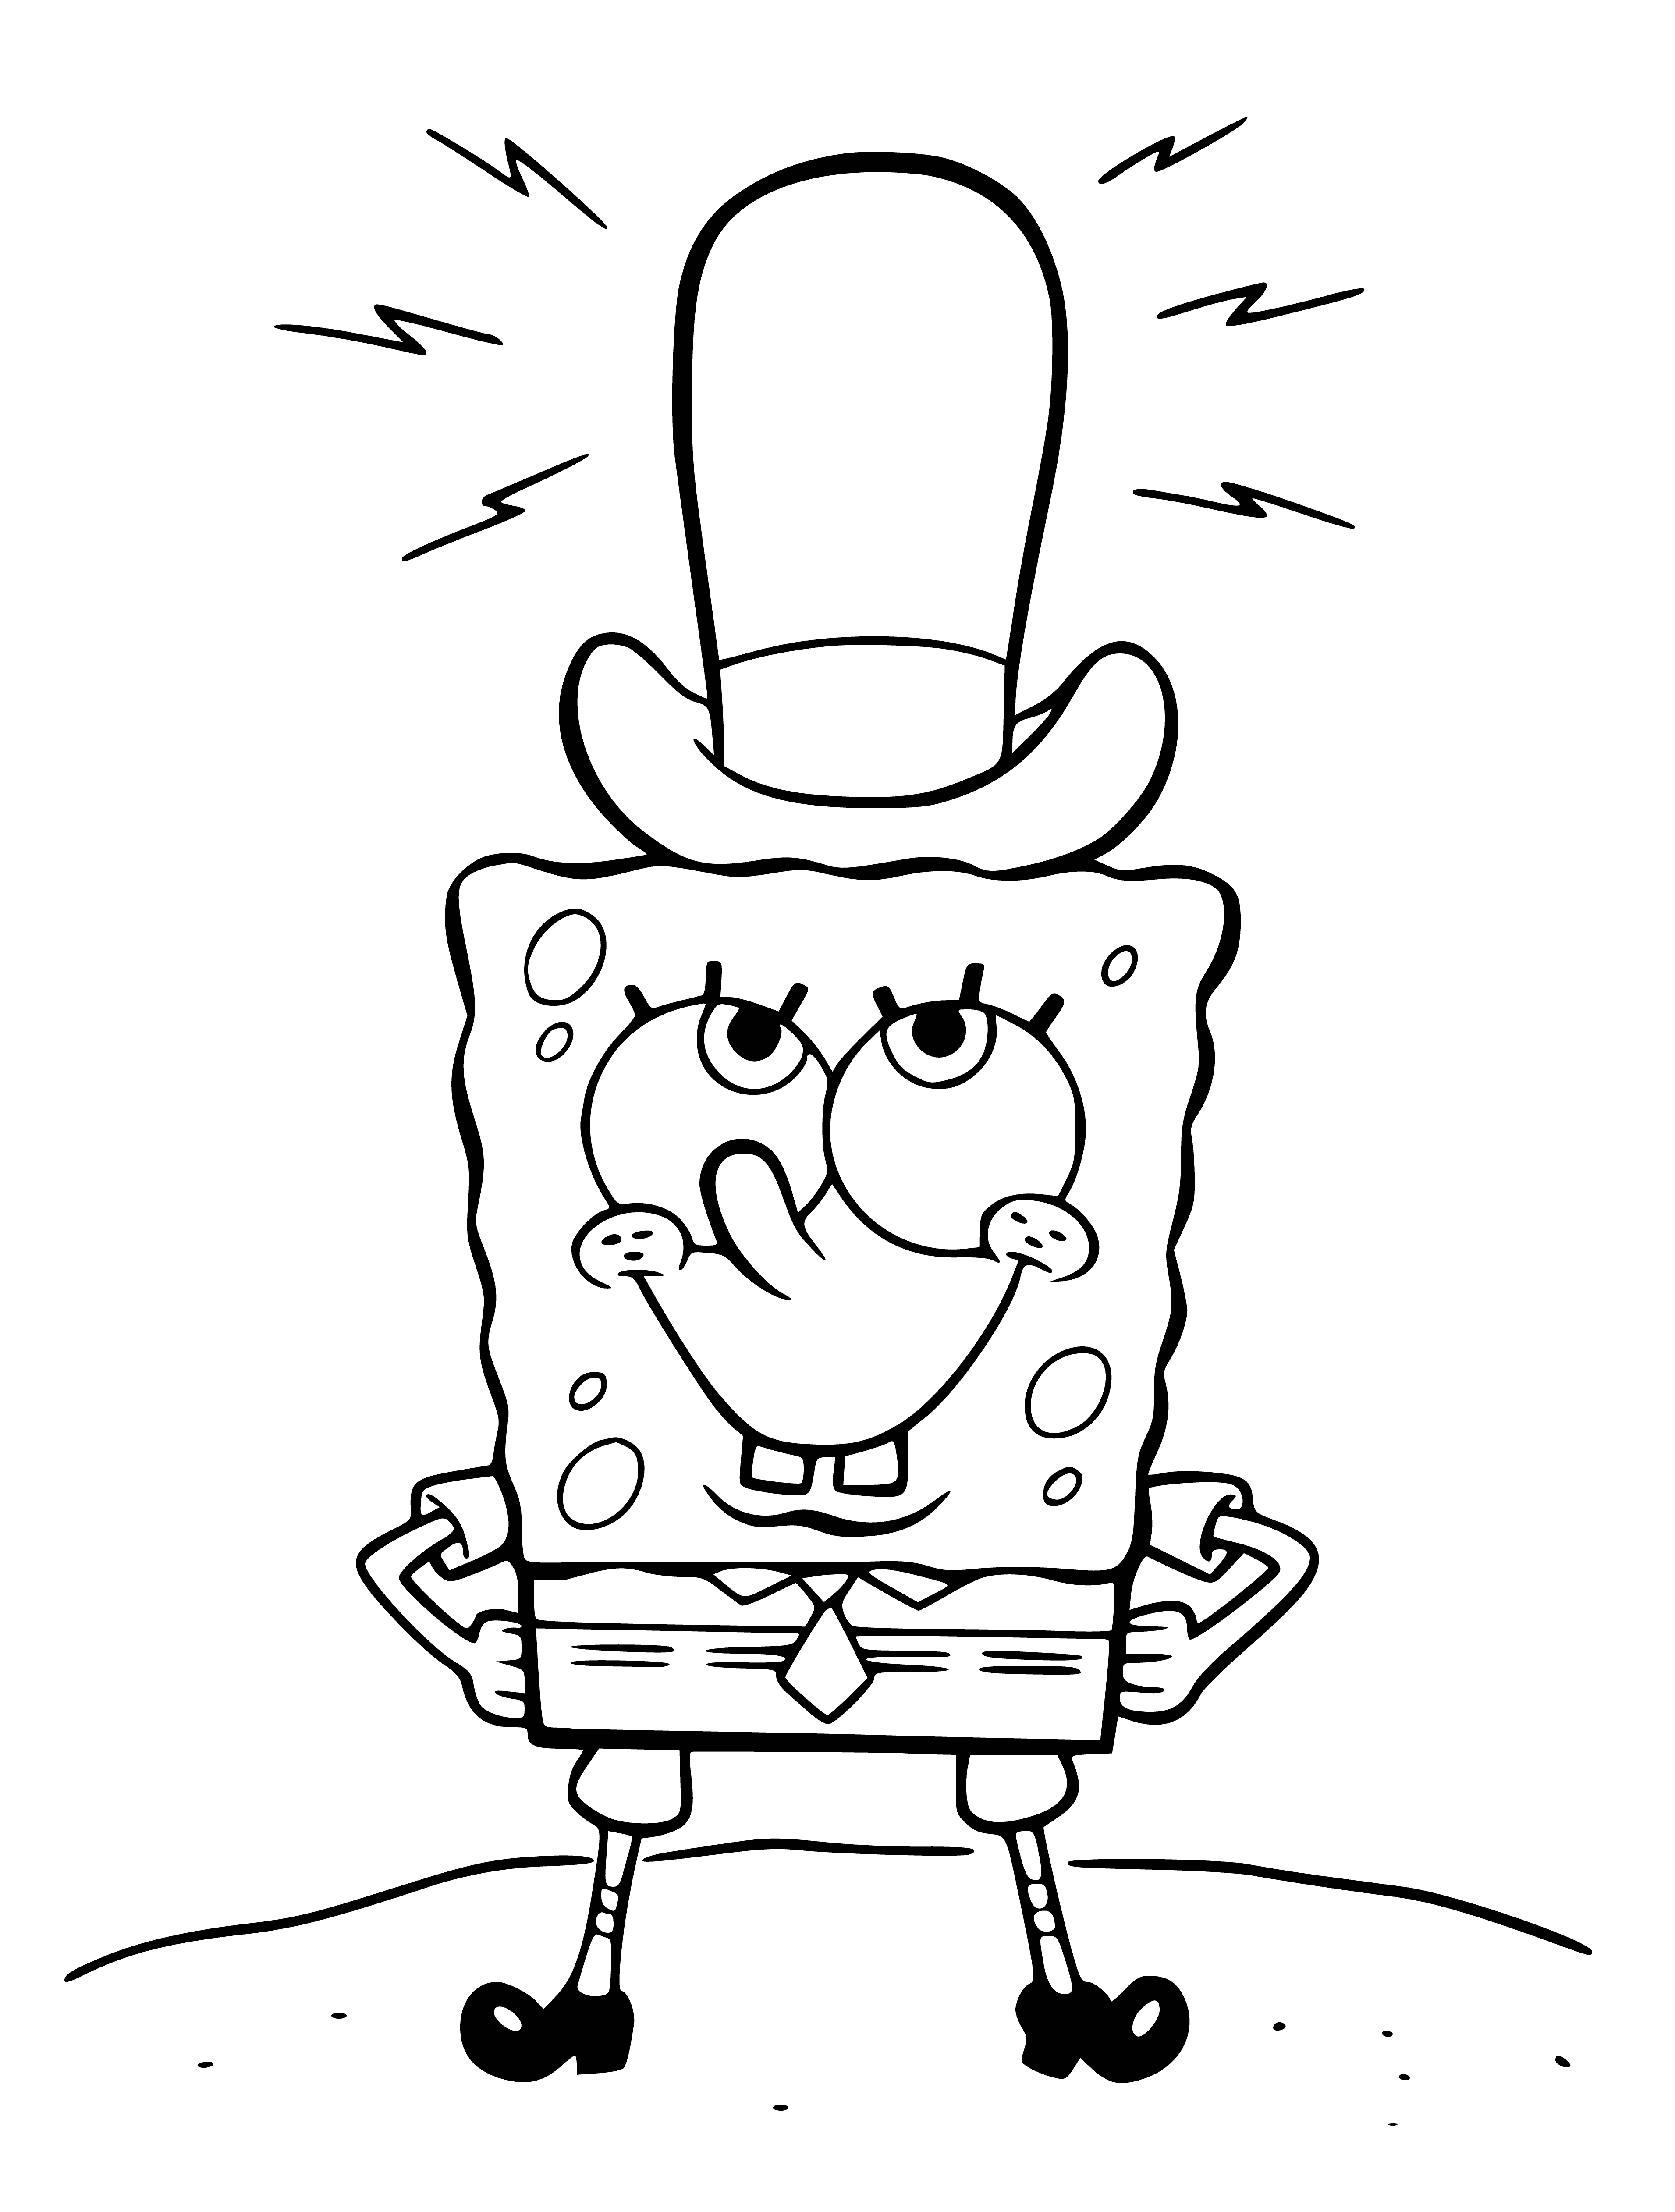 coloring page: SpongeBob SquarePants stars on coloring page. Yellow, blue eyes, gaping mouth, brown pants, white shirt, red tie, standing in front of large pink/purple flower. #Nickelodeon